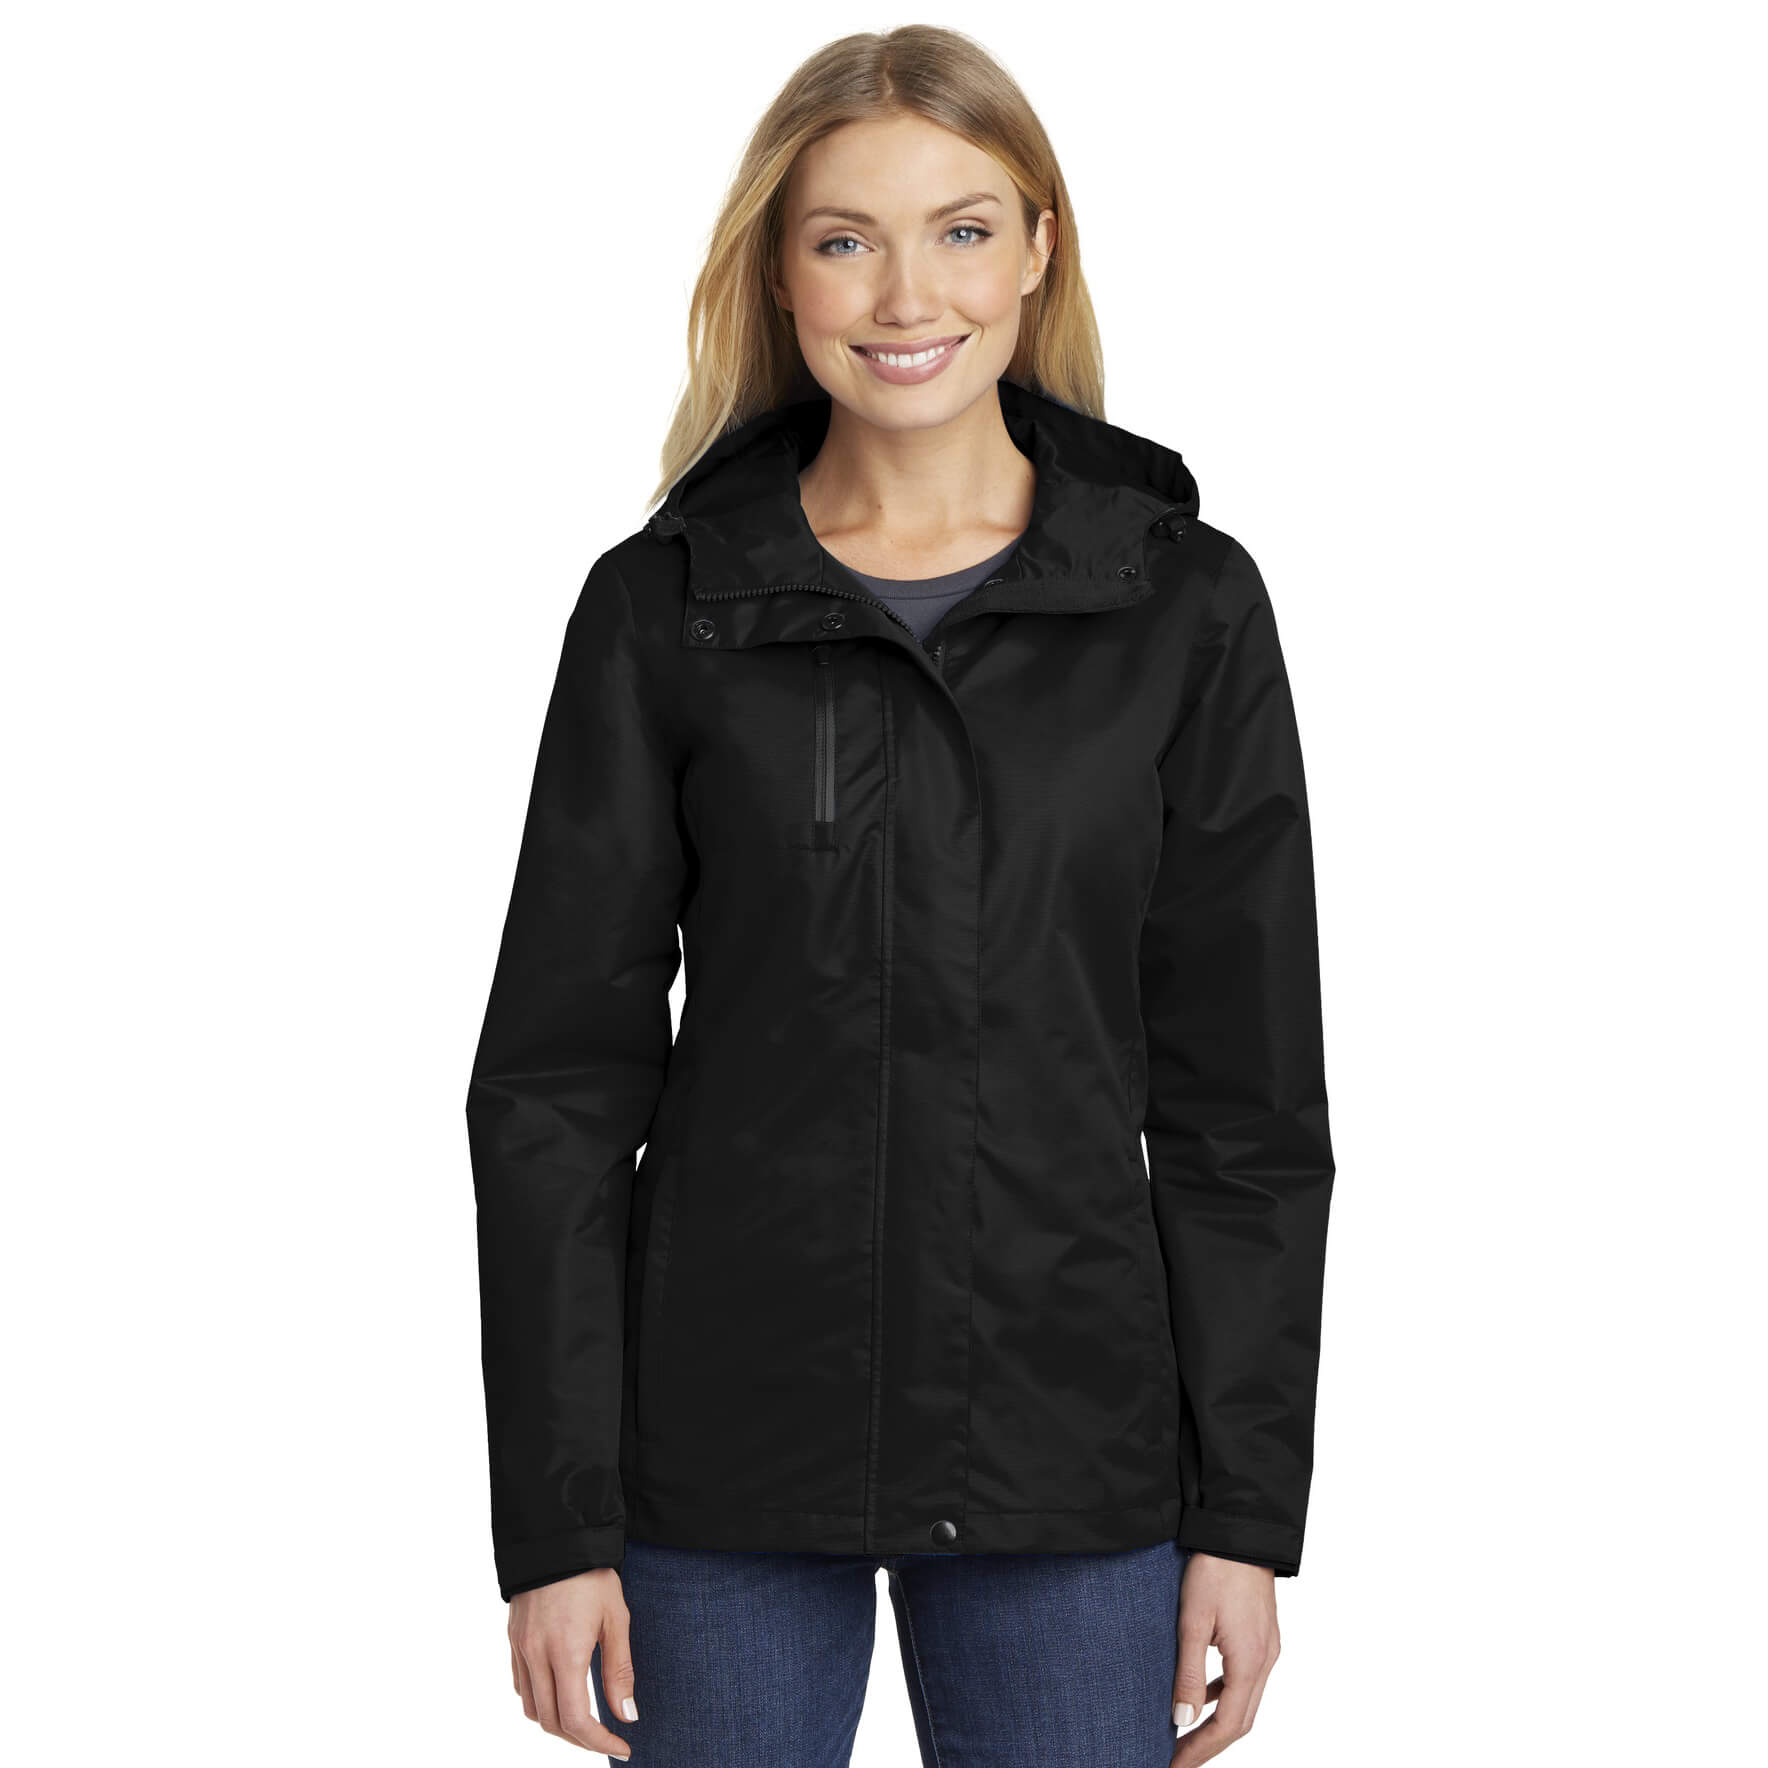 Port Authority ® Ladies All-Conditions Jacket - Phelps USA